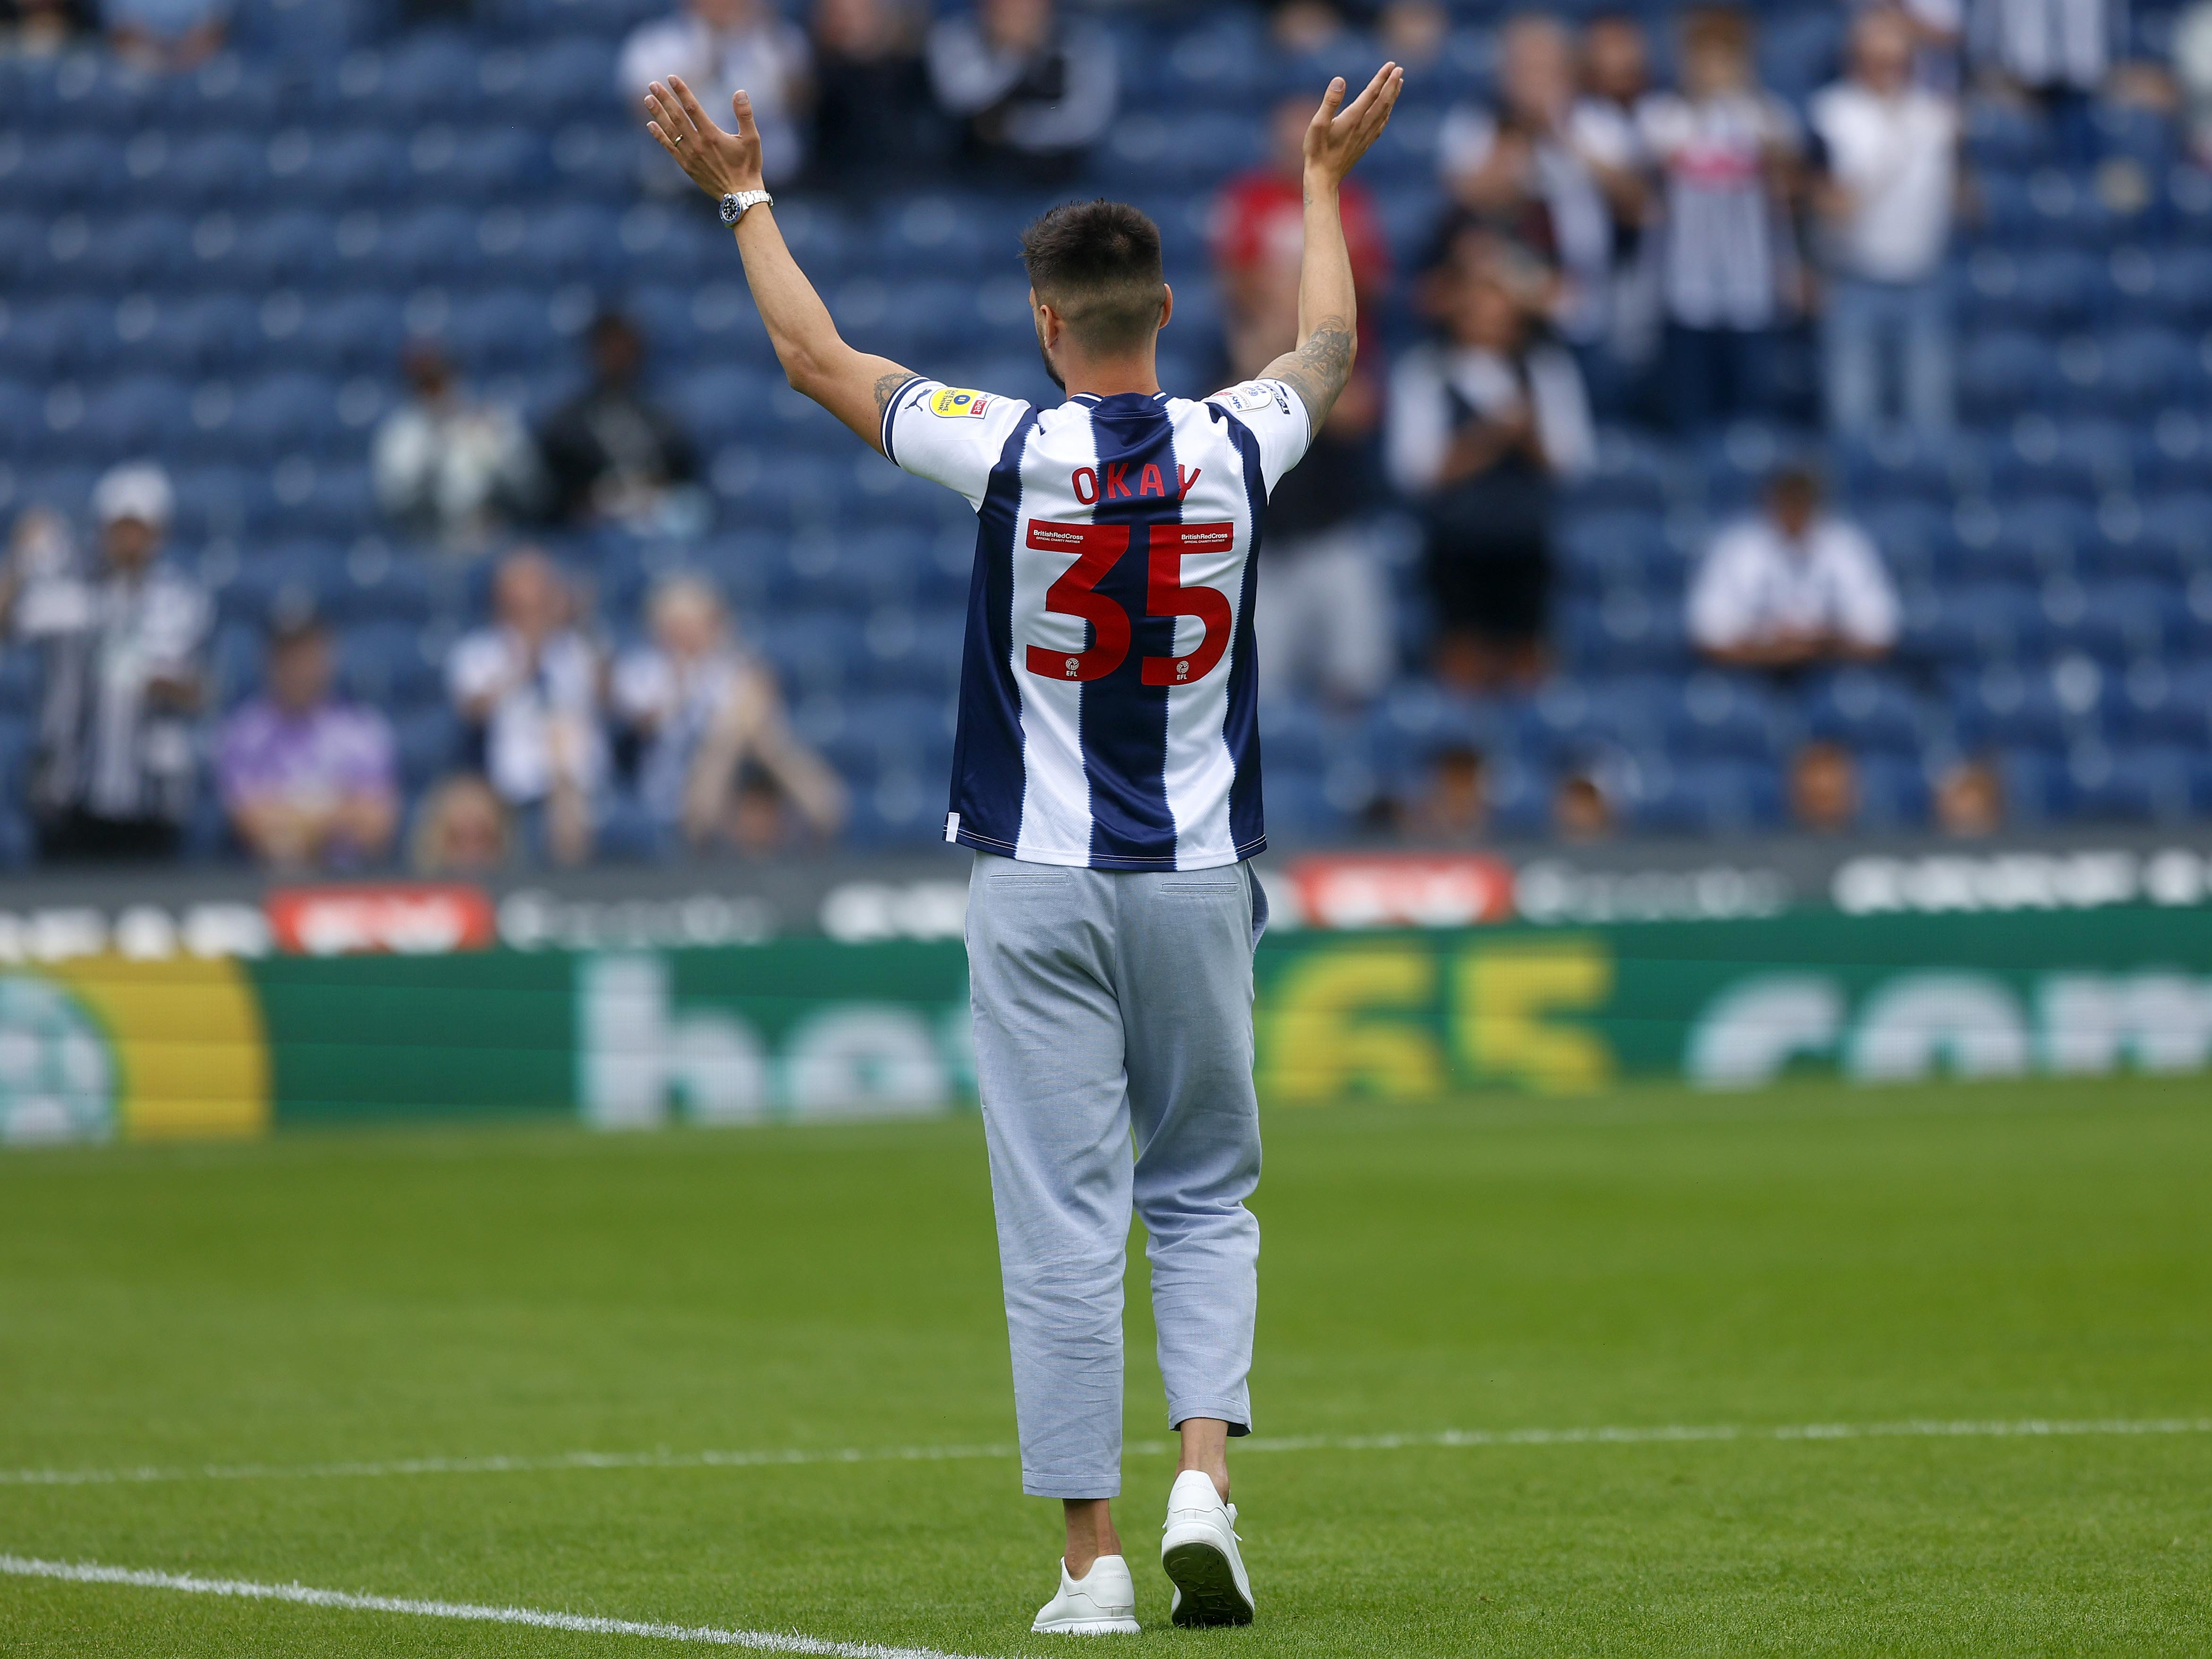 Okay Yokuşlu admits his “love” for Albion, his teammates, and the club’s fans combined to ensure an emotional return to the place he calls “home”